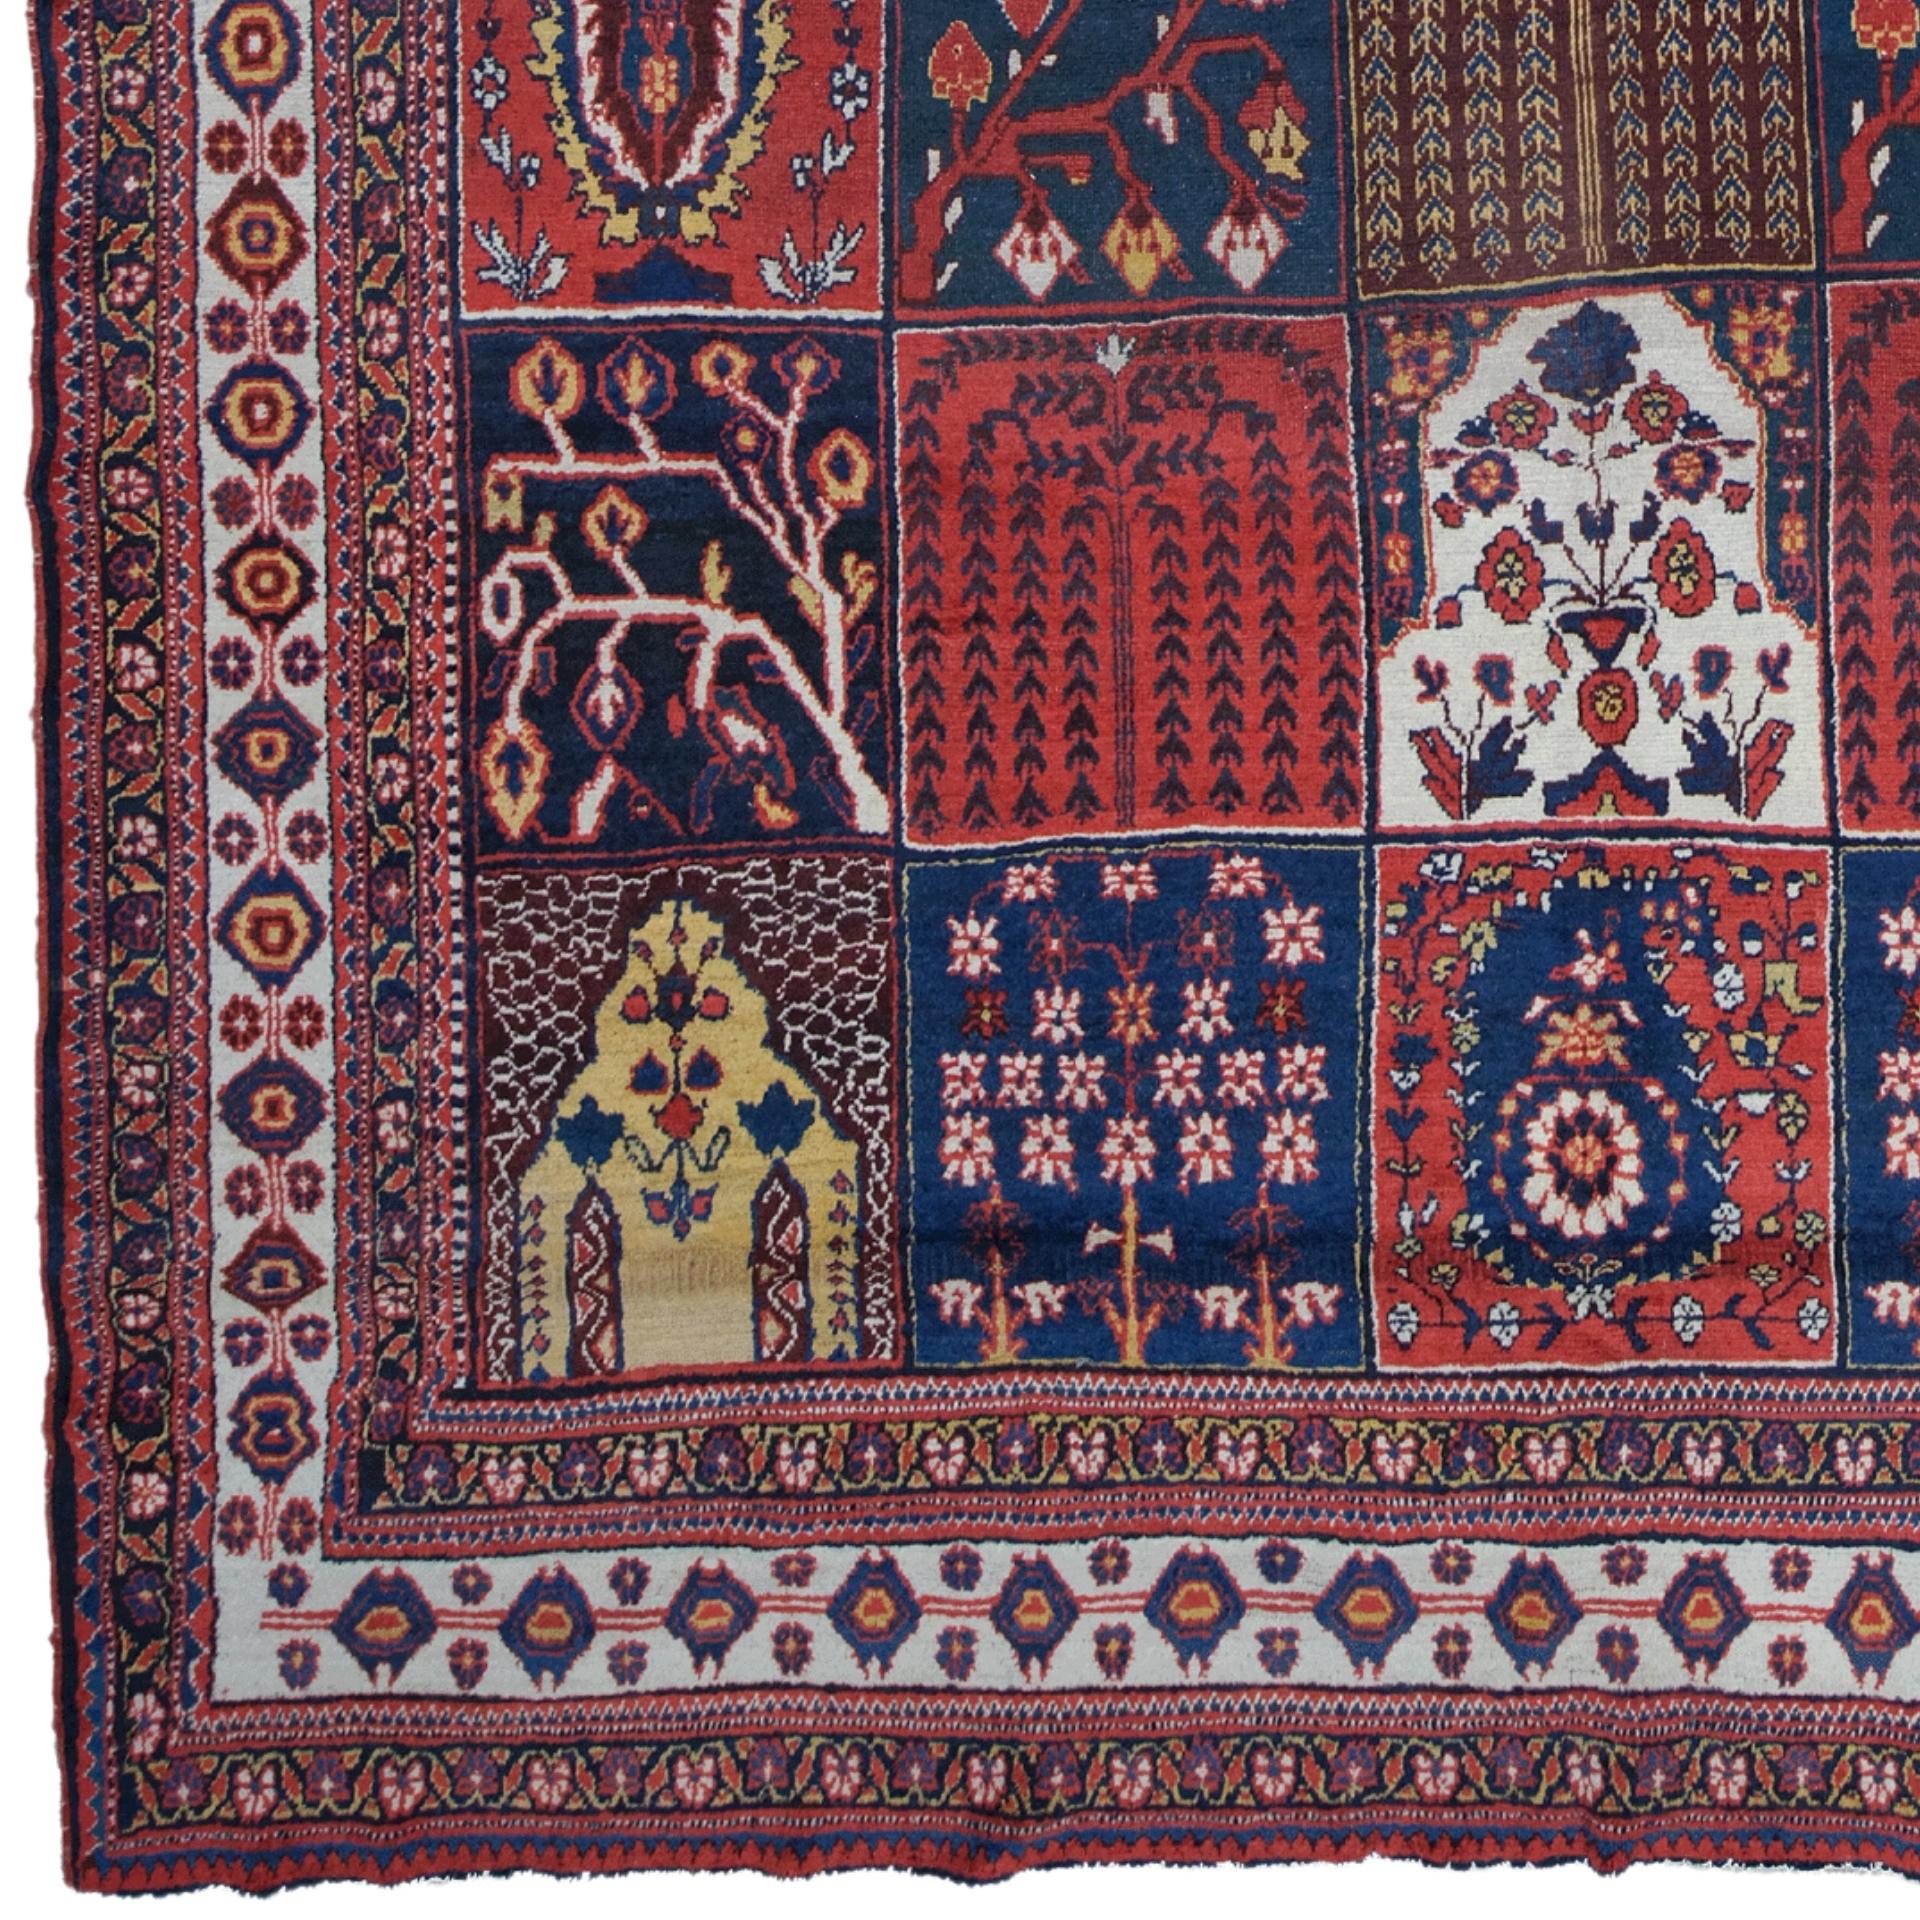 Antique Bakhtiari Qashqai Rug - 19th Century Qashqai Rug

This antique Bakhtiari carpet is a masterpiece woven with the handicraft and artistry of nomadic and peasant people living in the Zagros Mountains. This carpet, decorated with geometric or